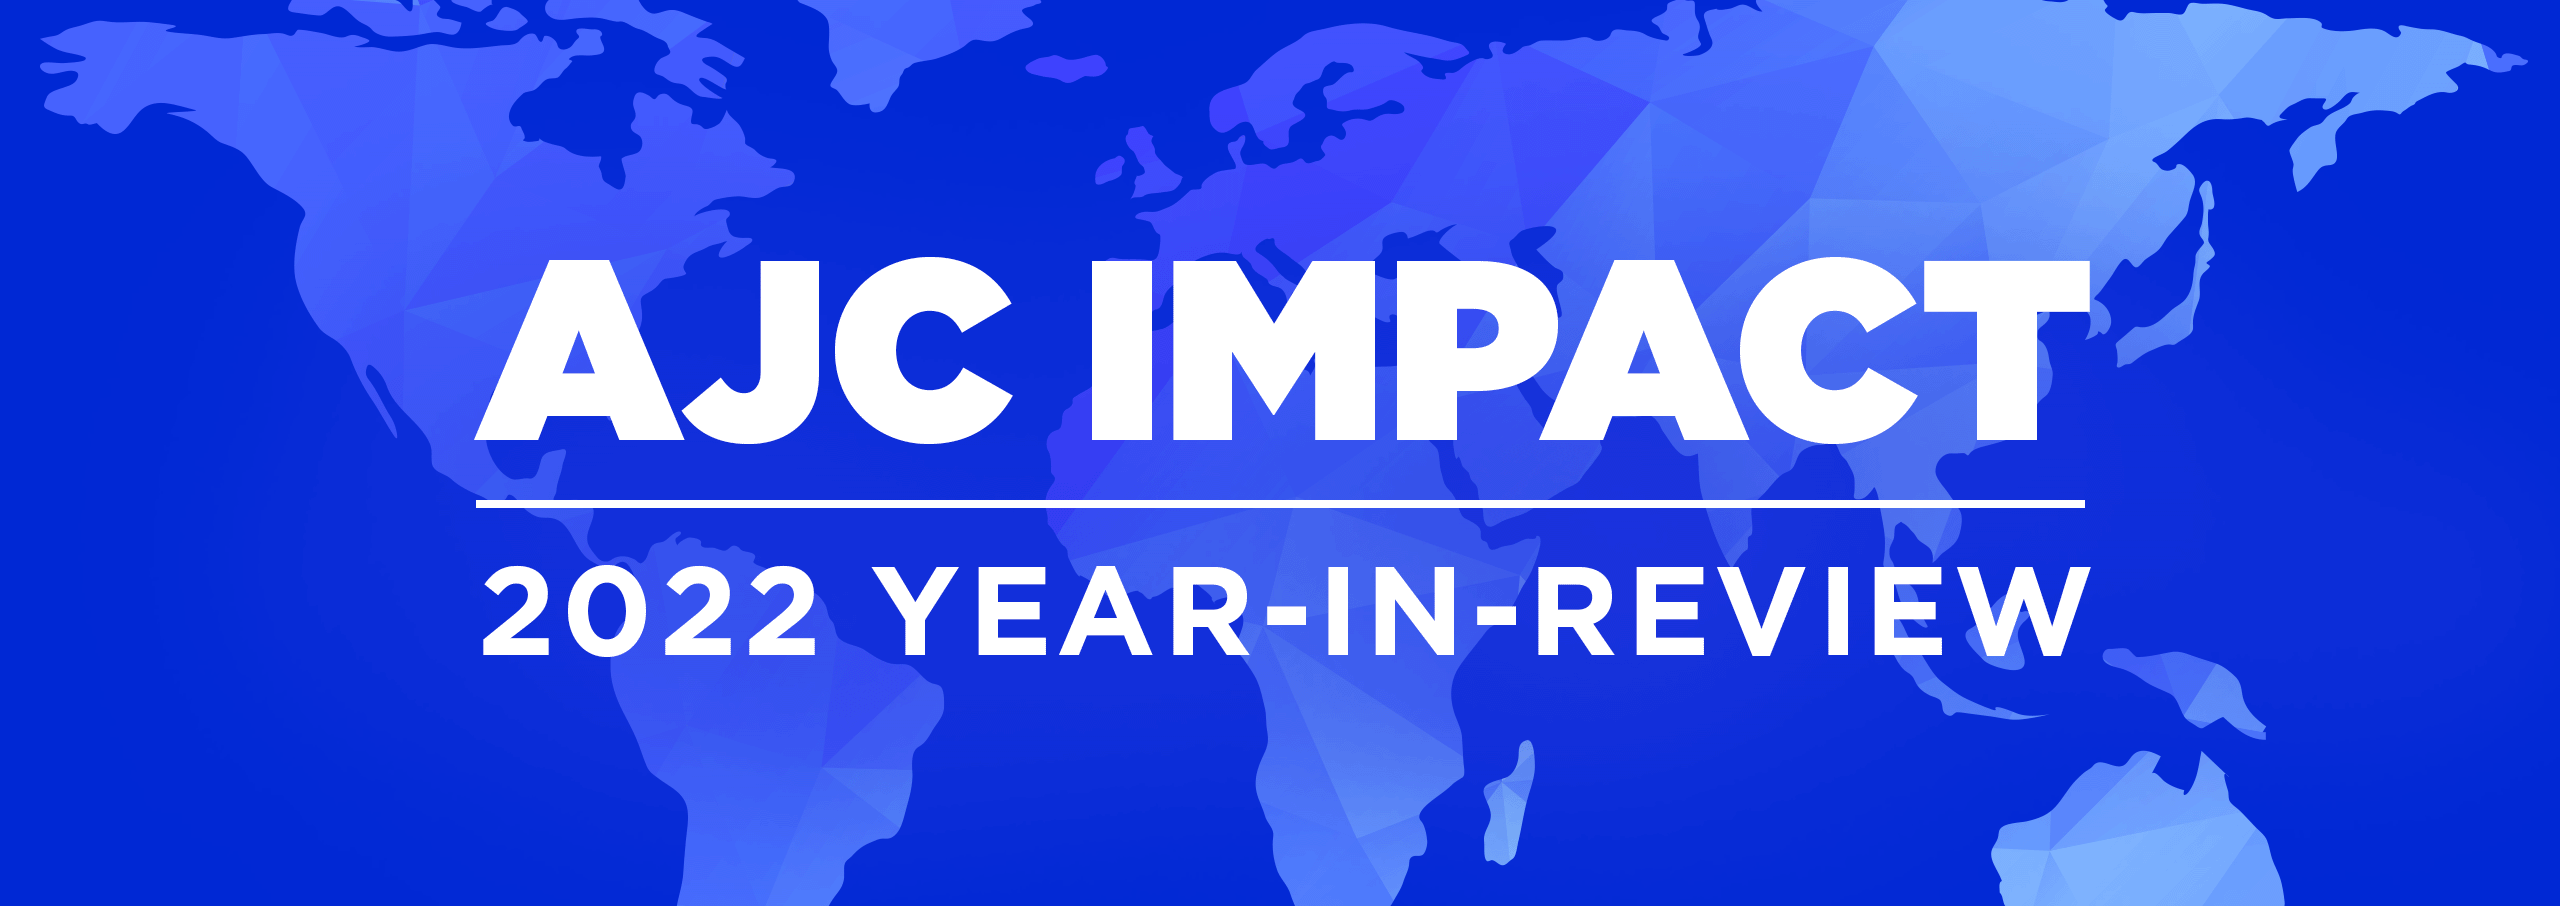 AJC IMPACT | 2022 Year-In-Review